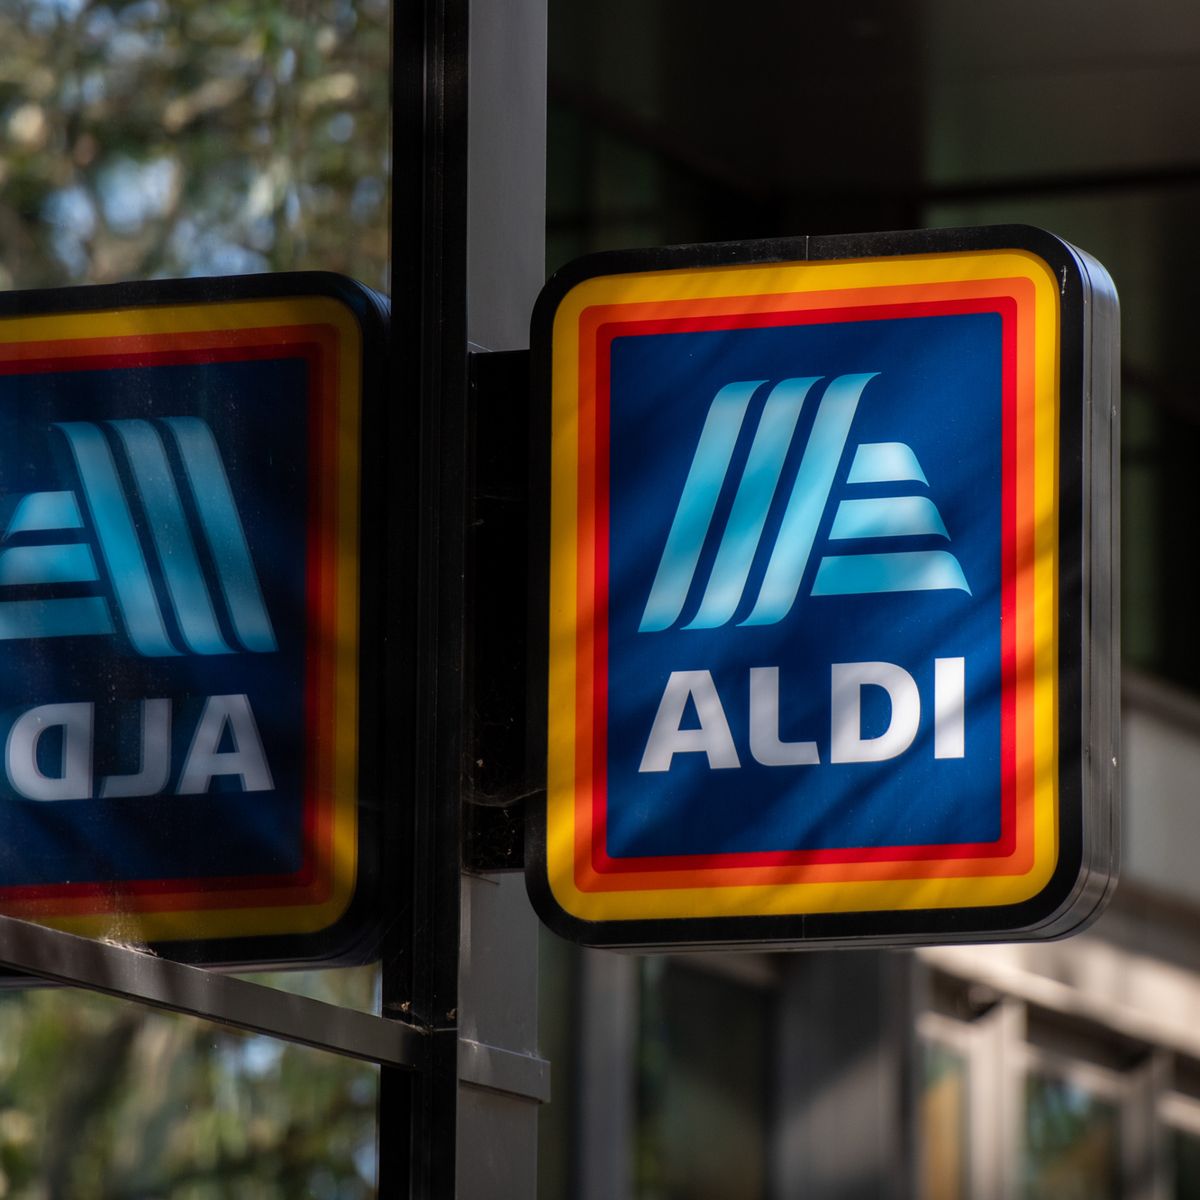 Aldi announces plans to open new stores in 22 locations – is your city on the list?